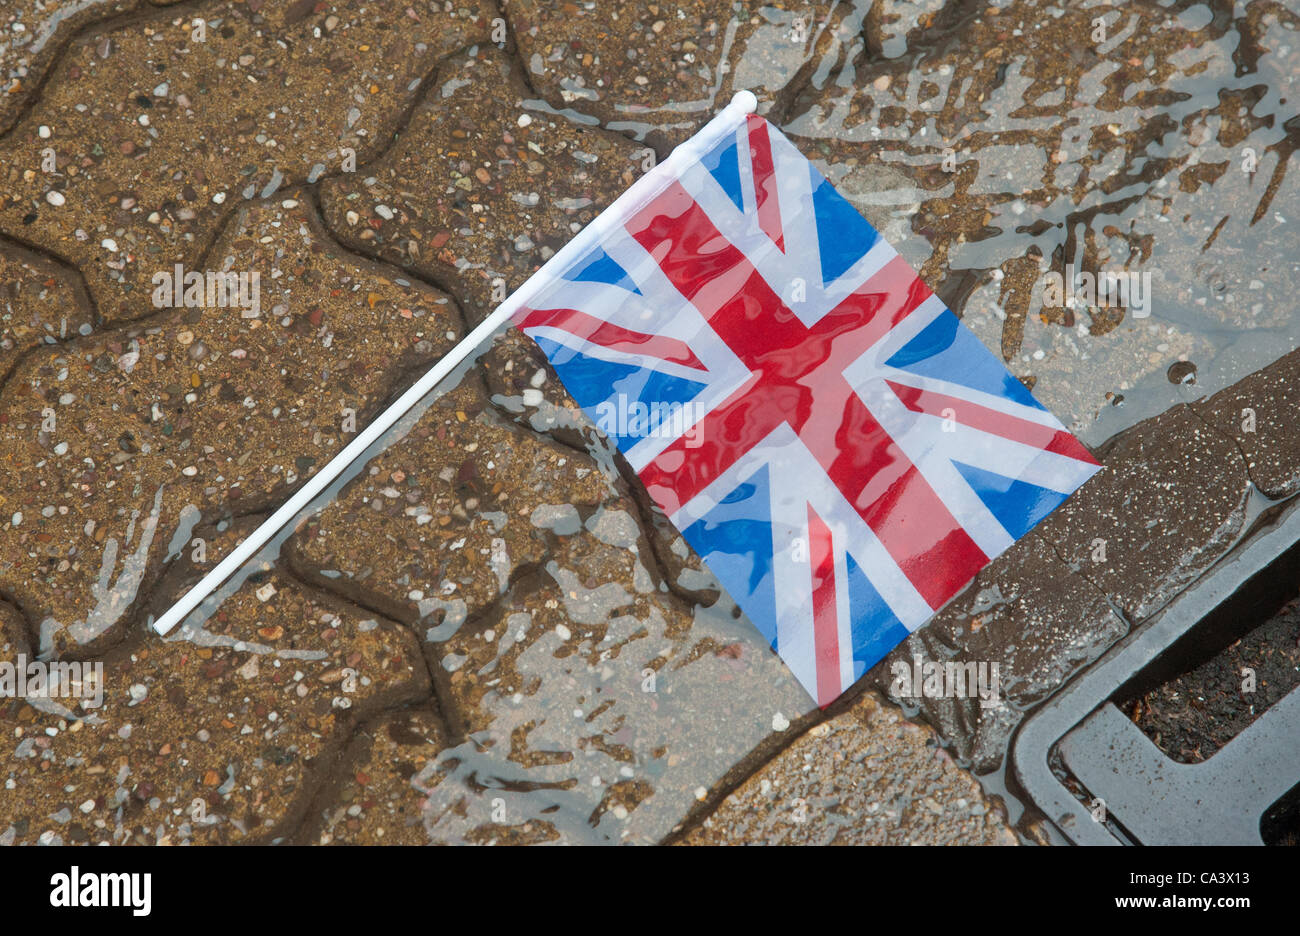 Jubilee Celebrations, Redditch , Worcestershire. Wet weather hit  Jubilee Celebrations across the Midlands, picture shows a Union Jack flag being washed away during a downpour in Redditch Town Centre. Stock Photo